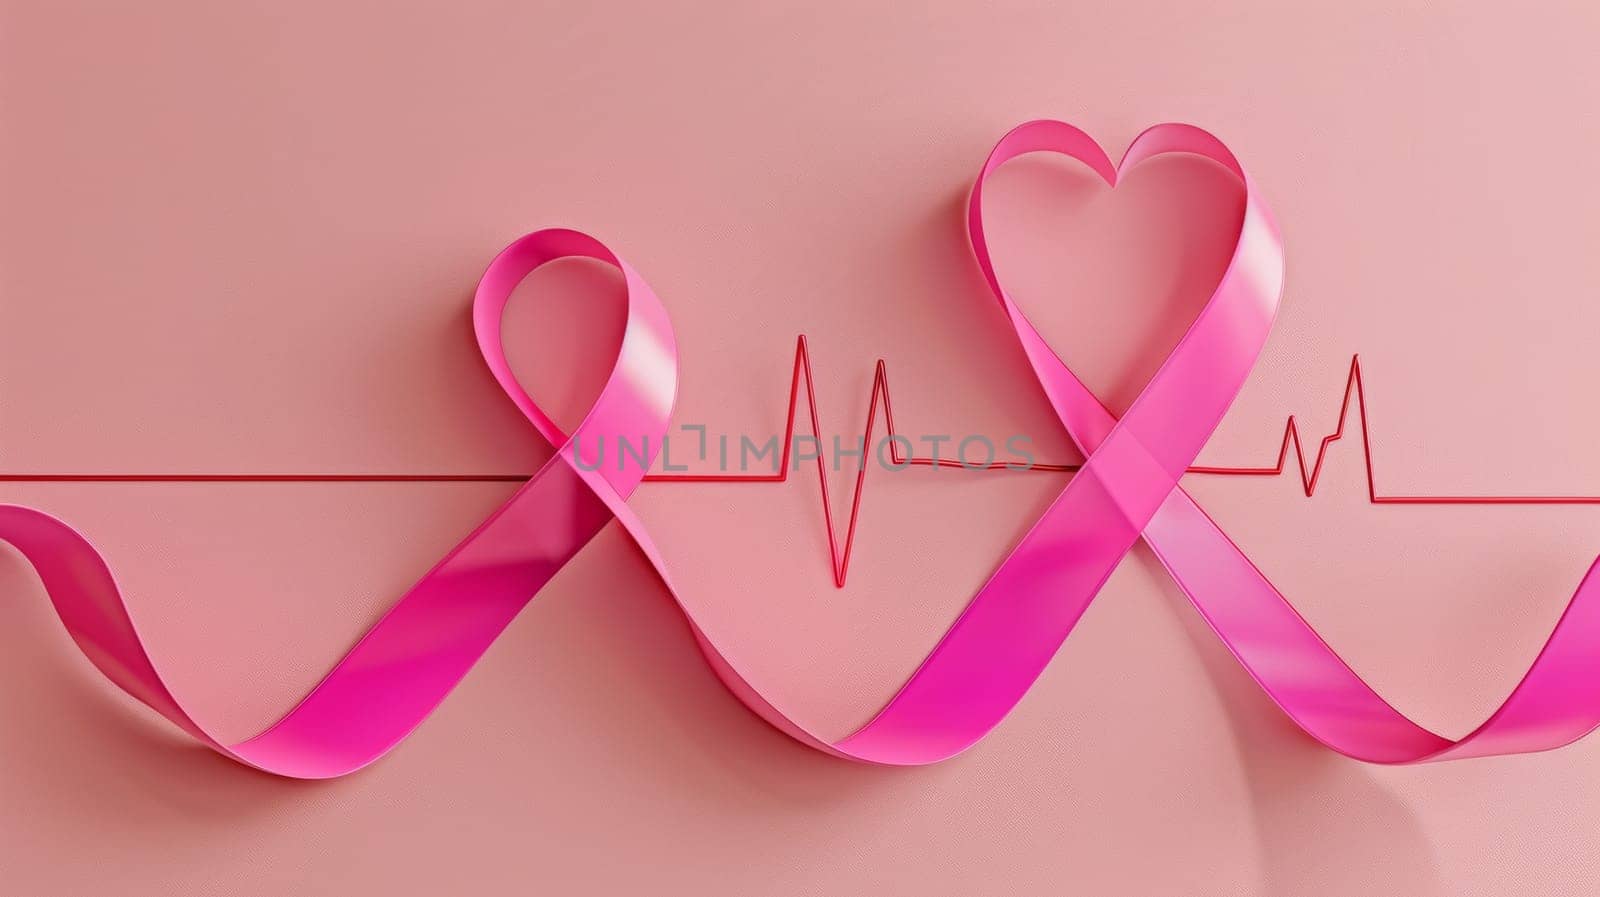 Pink Ribbon and Heartbeat. Symbol of Breast Cancer Awareness, Hope, and Support by ailike